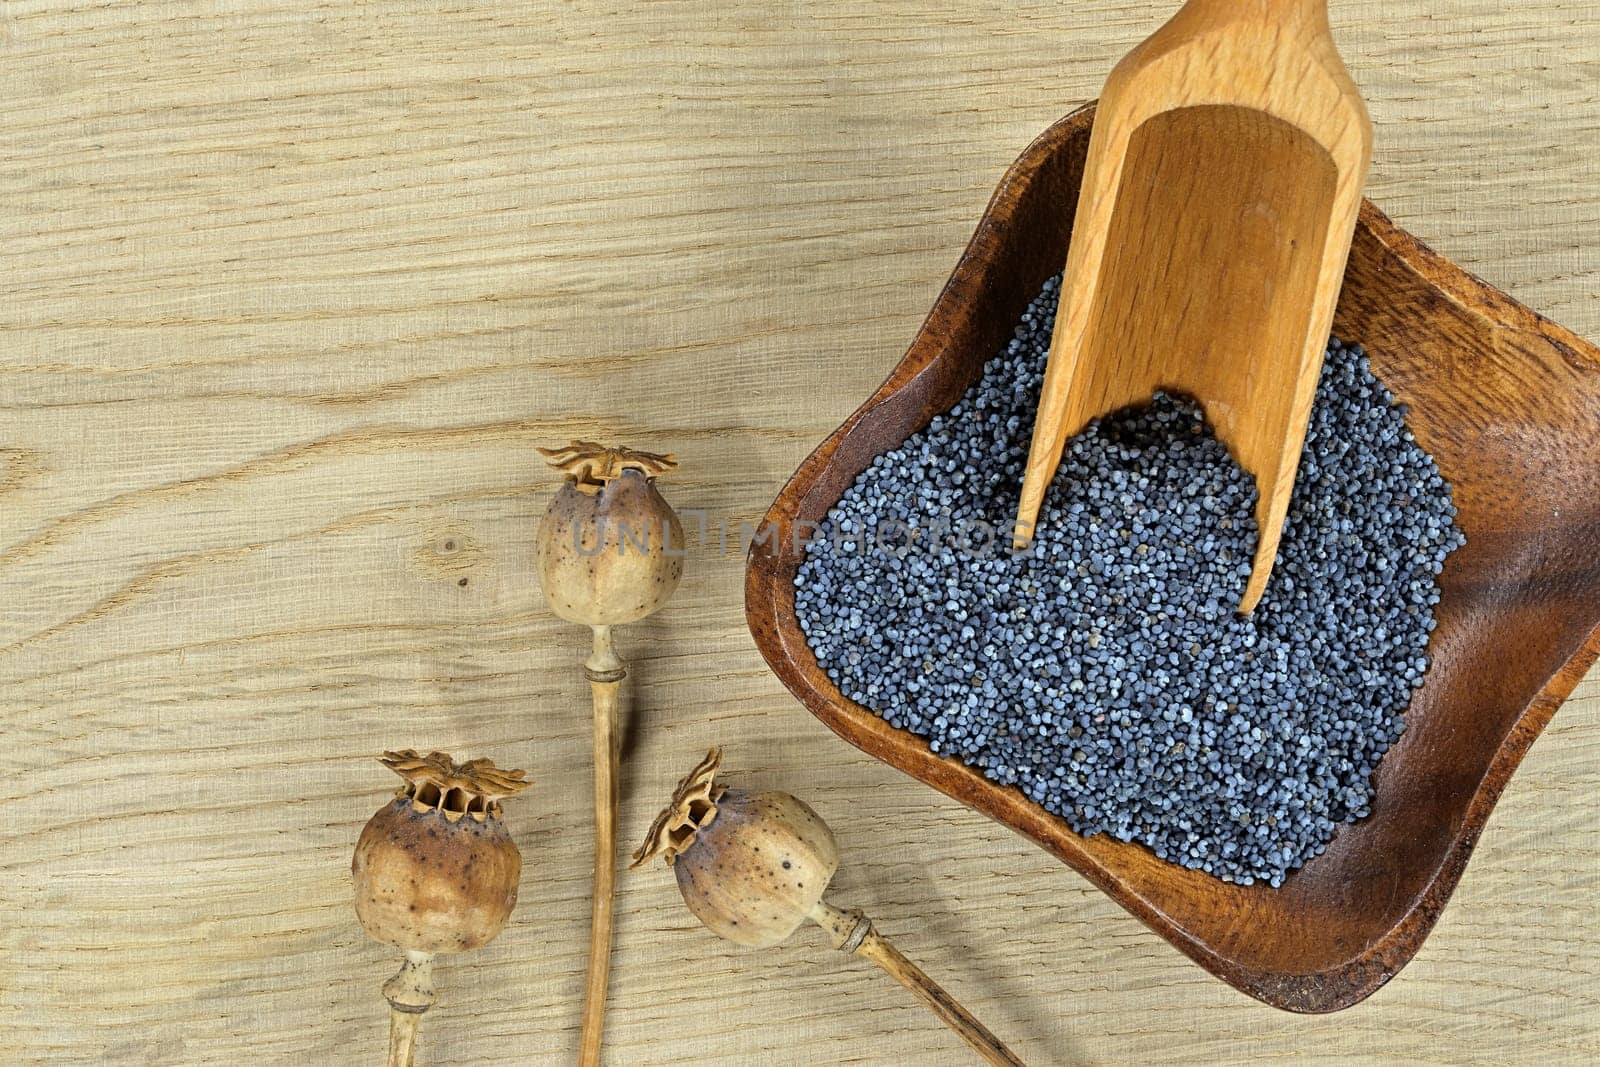 Small wooden bowl filled with black poppy seeds and dried poppy seed heads on rustic wooden table